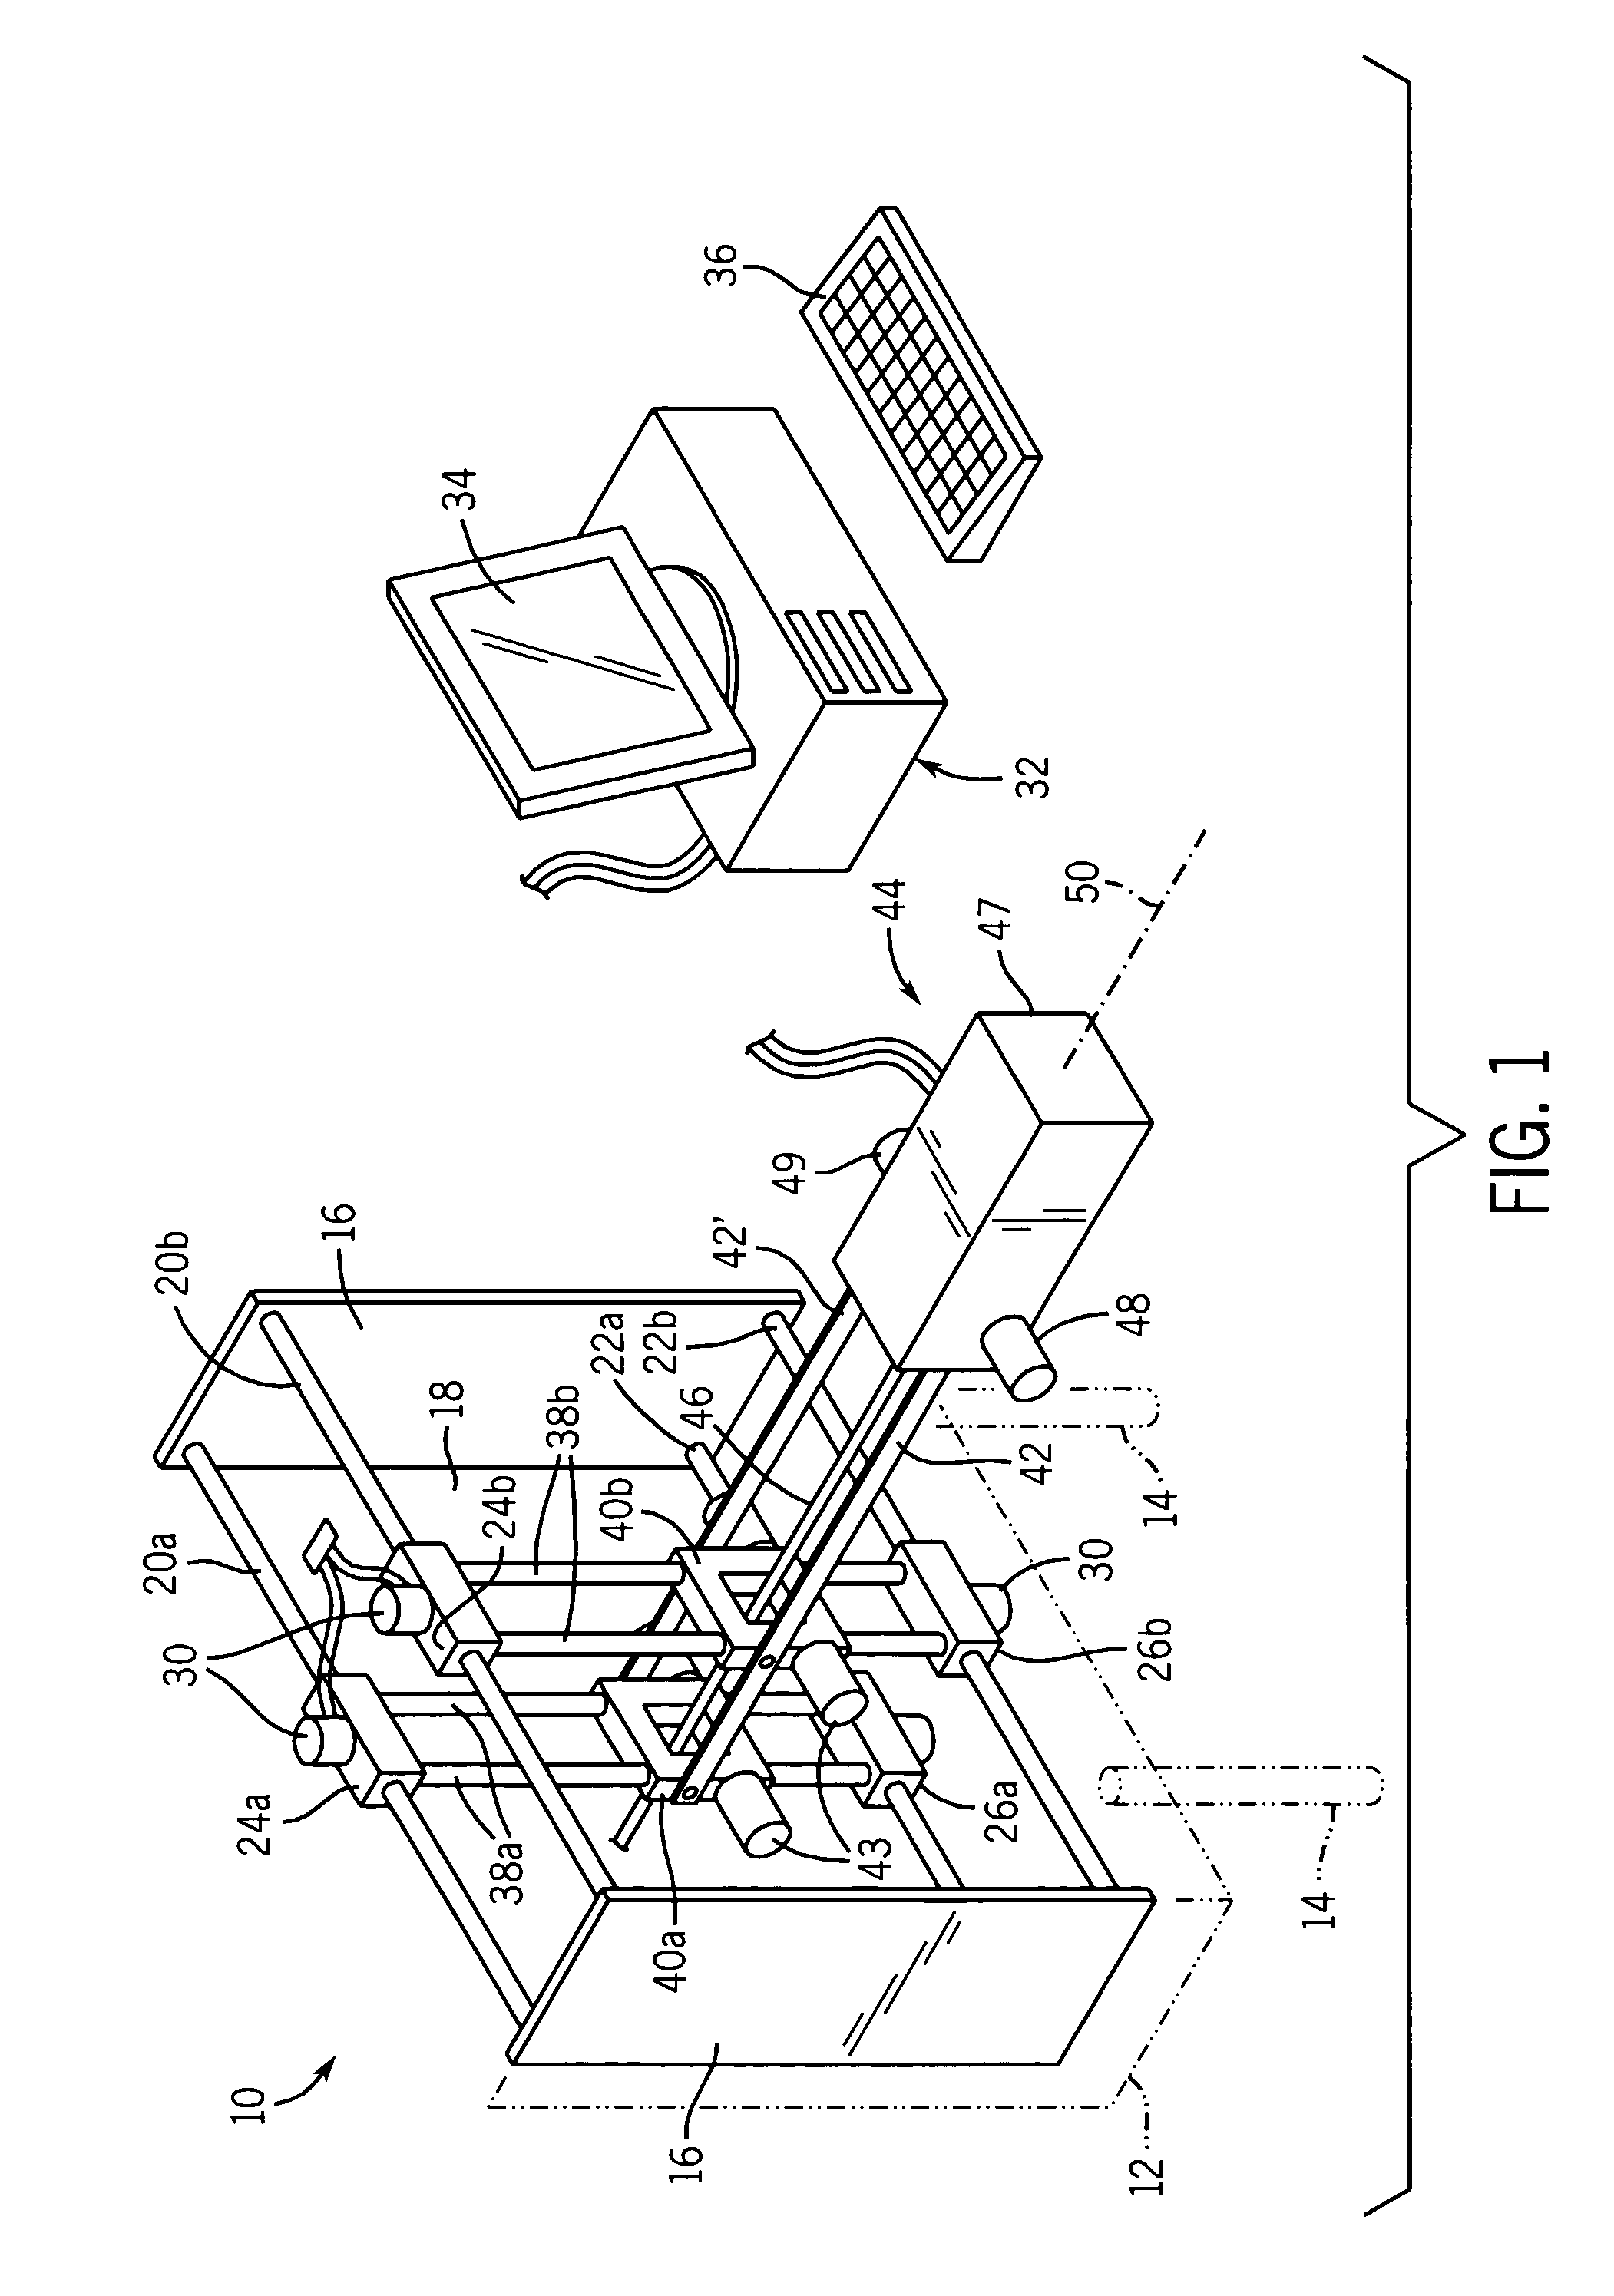 Device for placement of needles and radioactive seeds in radiotherapy